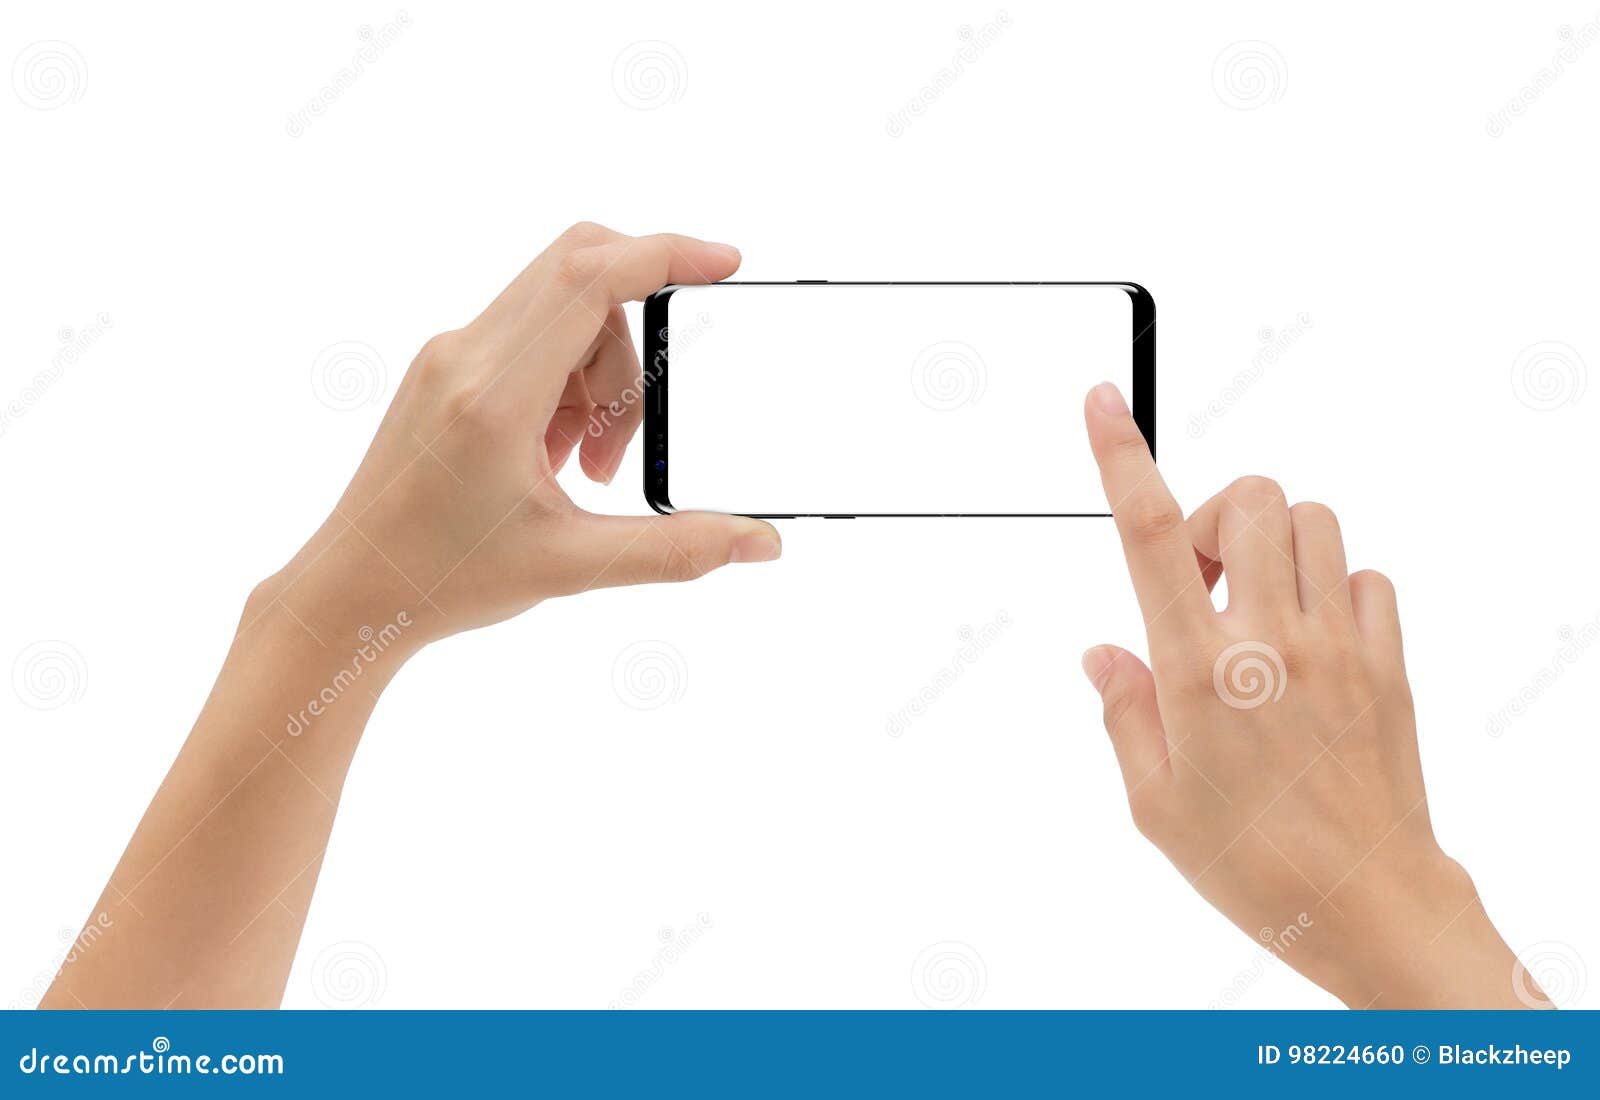 hand holding smartphone mobile and touching screen 